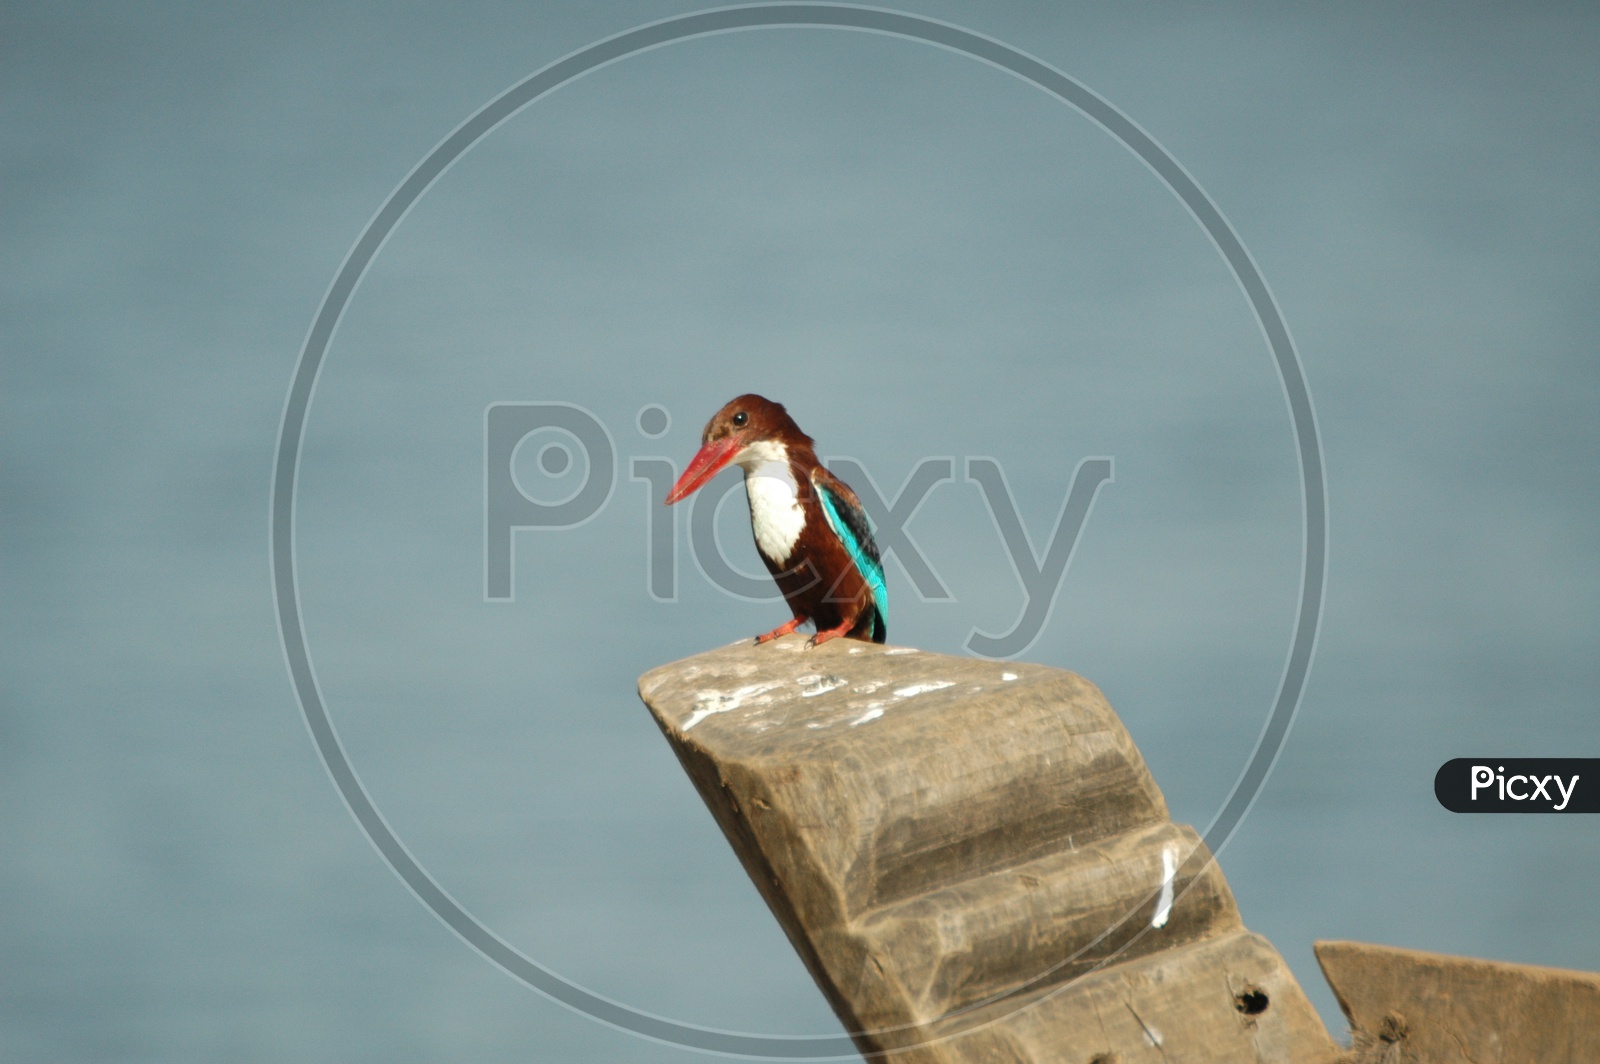 White throated kingfisher, also known as white breasted kingfisher